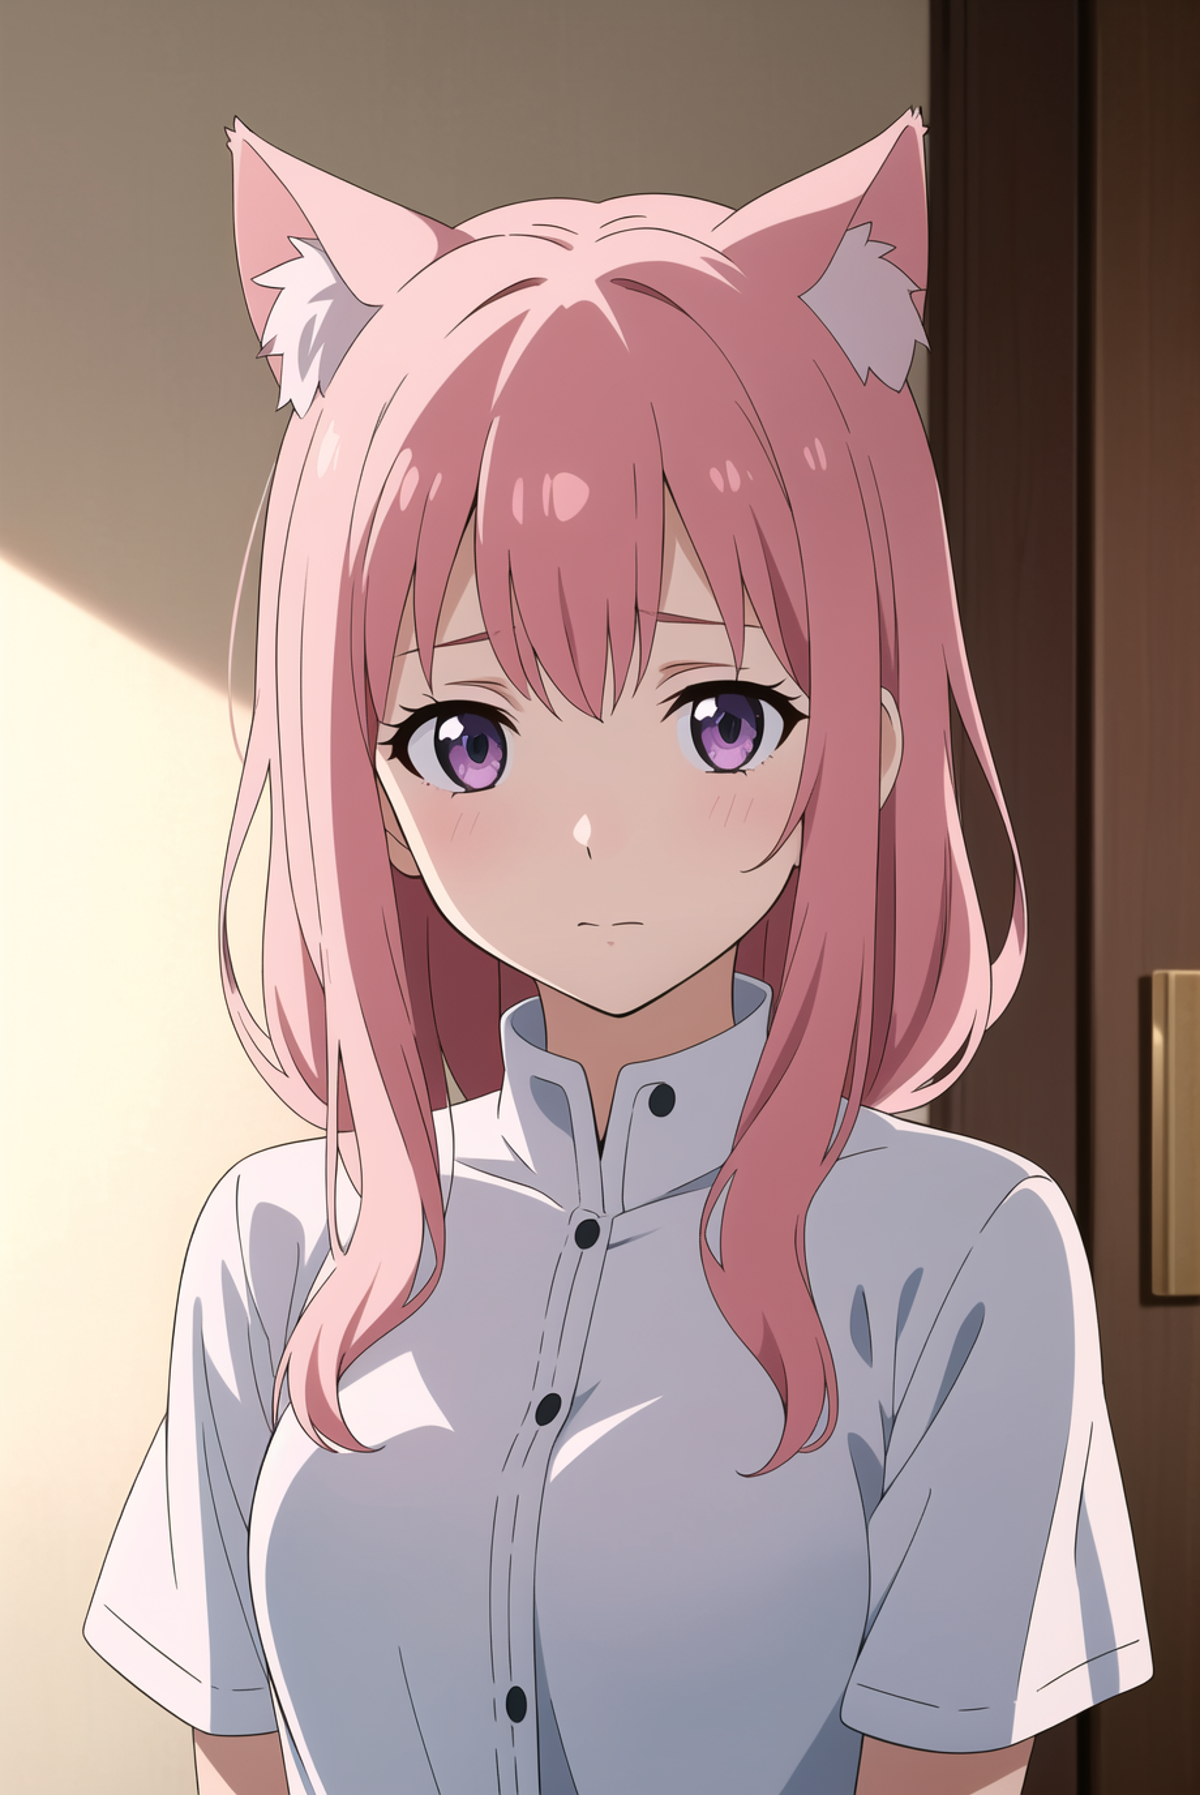 A pink-haired girl wearing a white shirt.